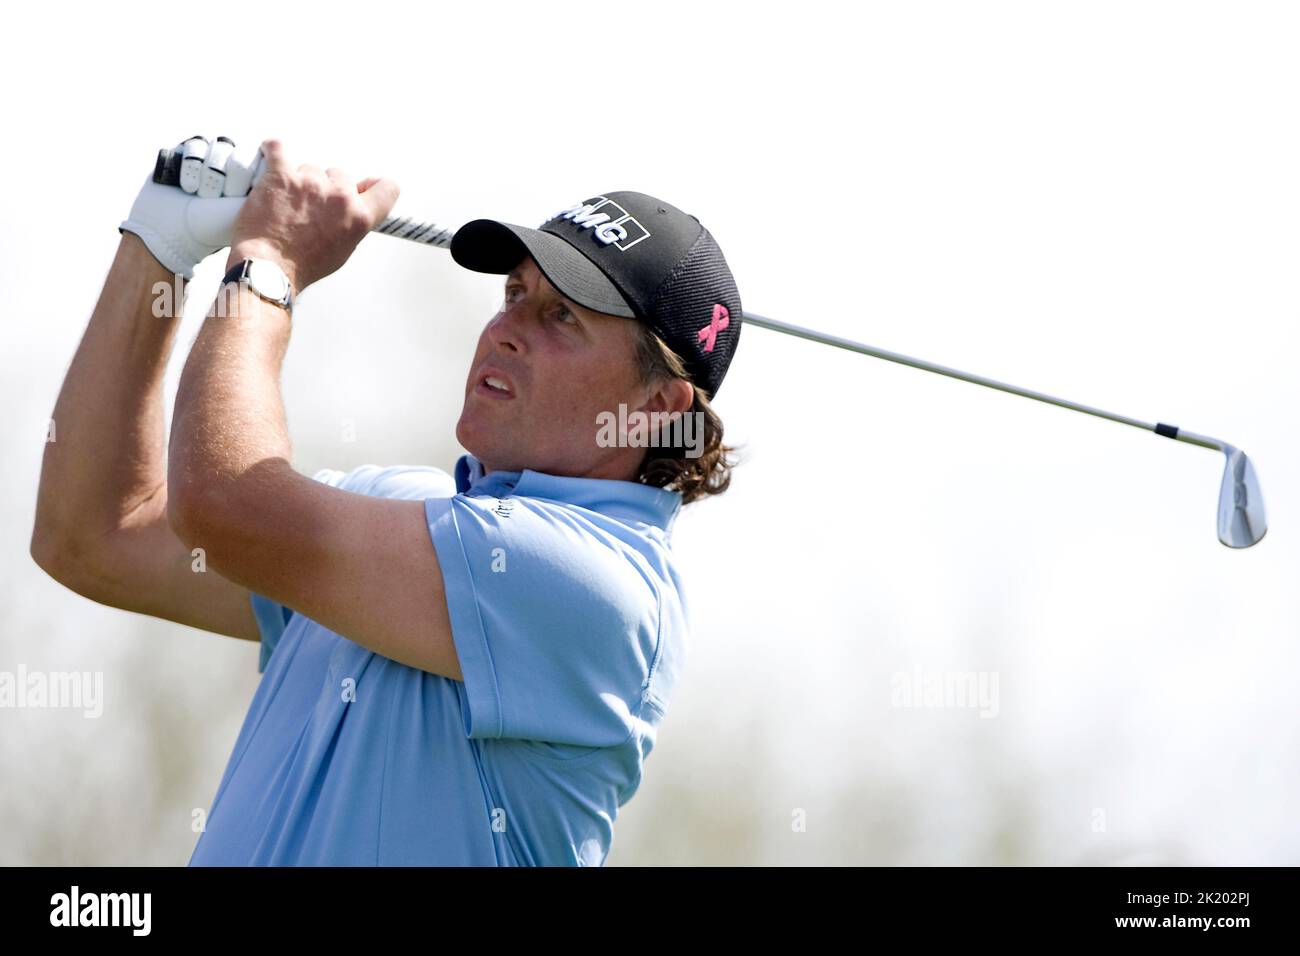 PGA golfer Phil Mickelson in action during a tour event. Stock Photo